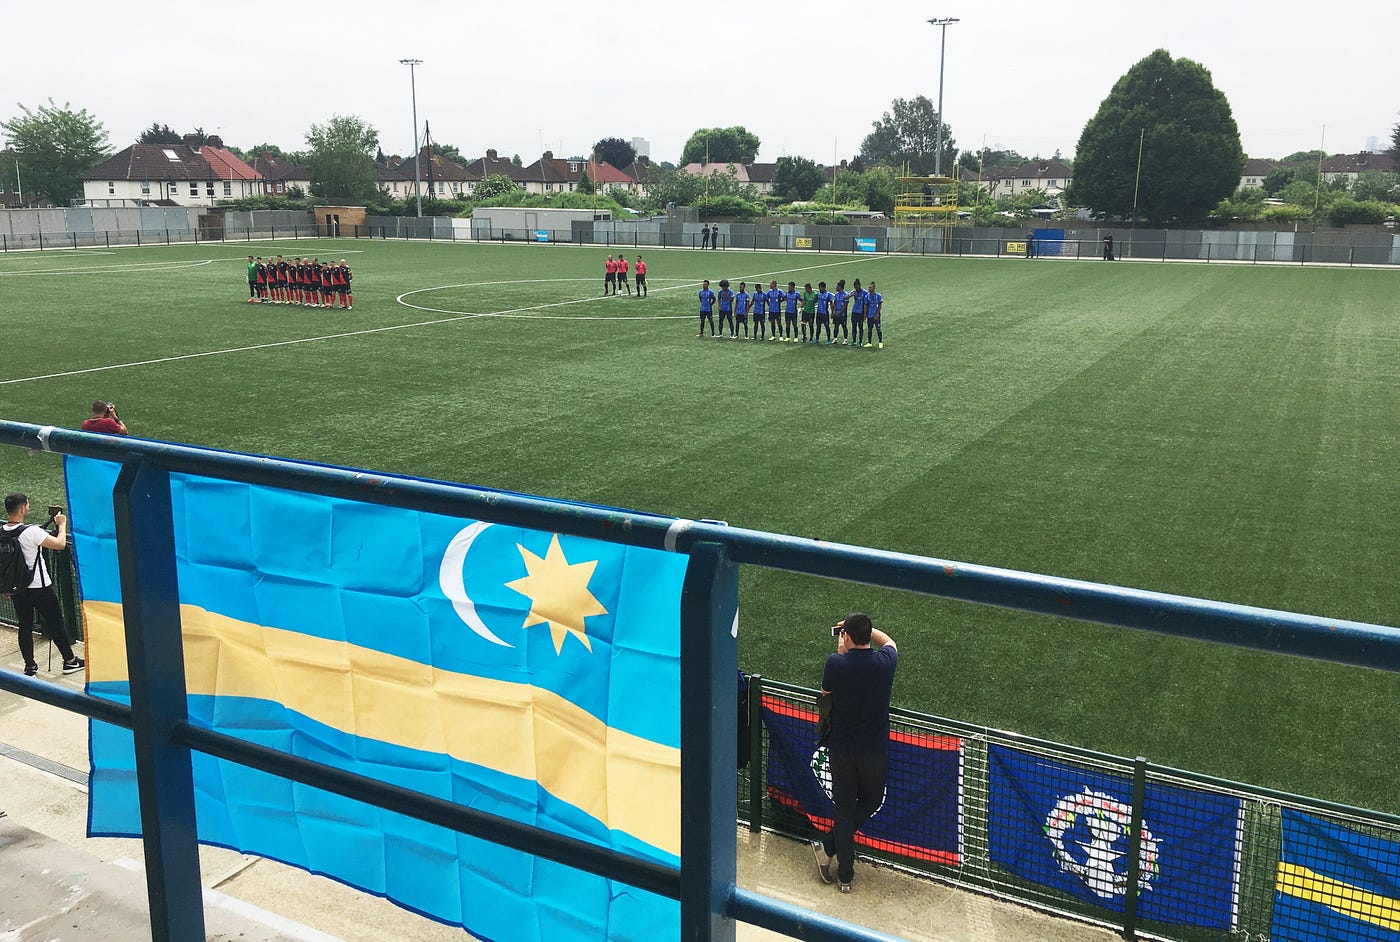 The Leftouts: Behind the scenes at the CONIFA World Football Cup, Alexis  James